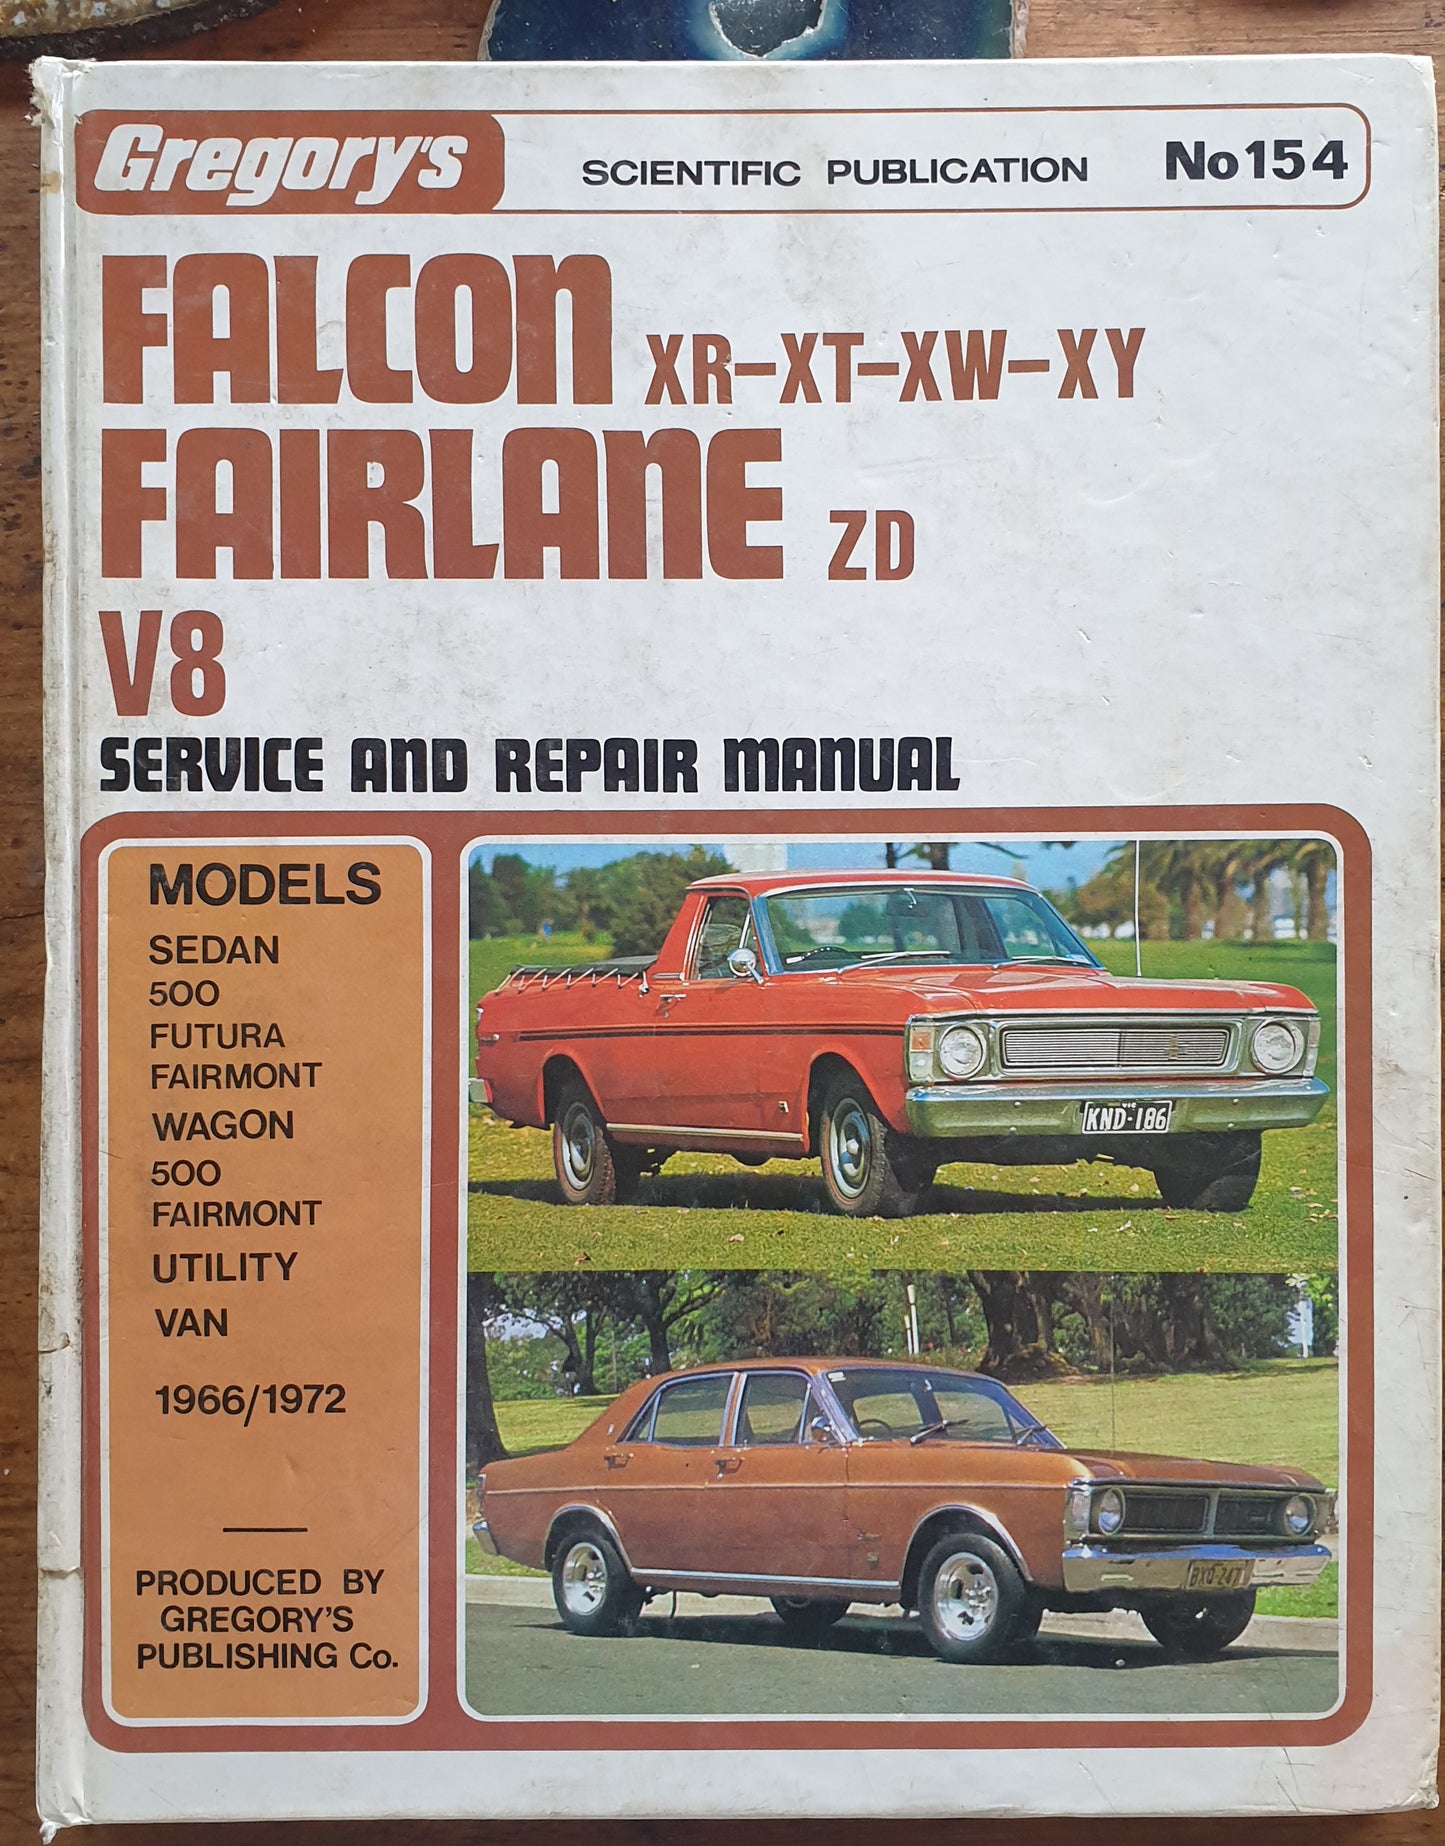 Gregorys No. 154 Falcon Fairlane Service and Repair Manual 272 pages